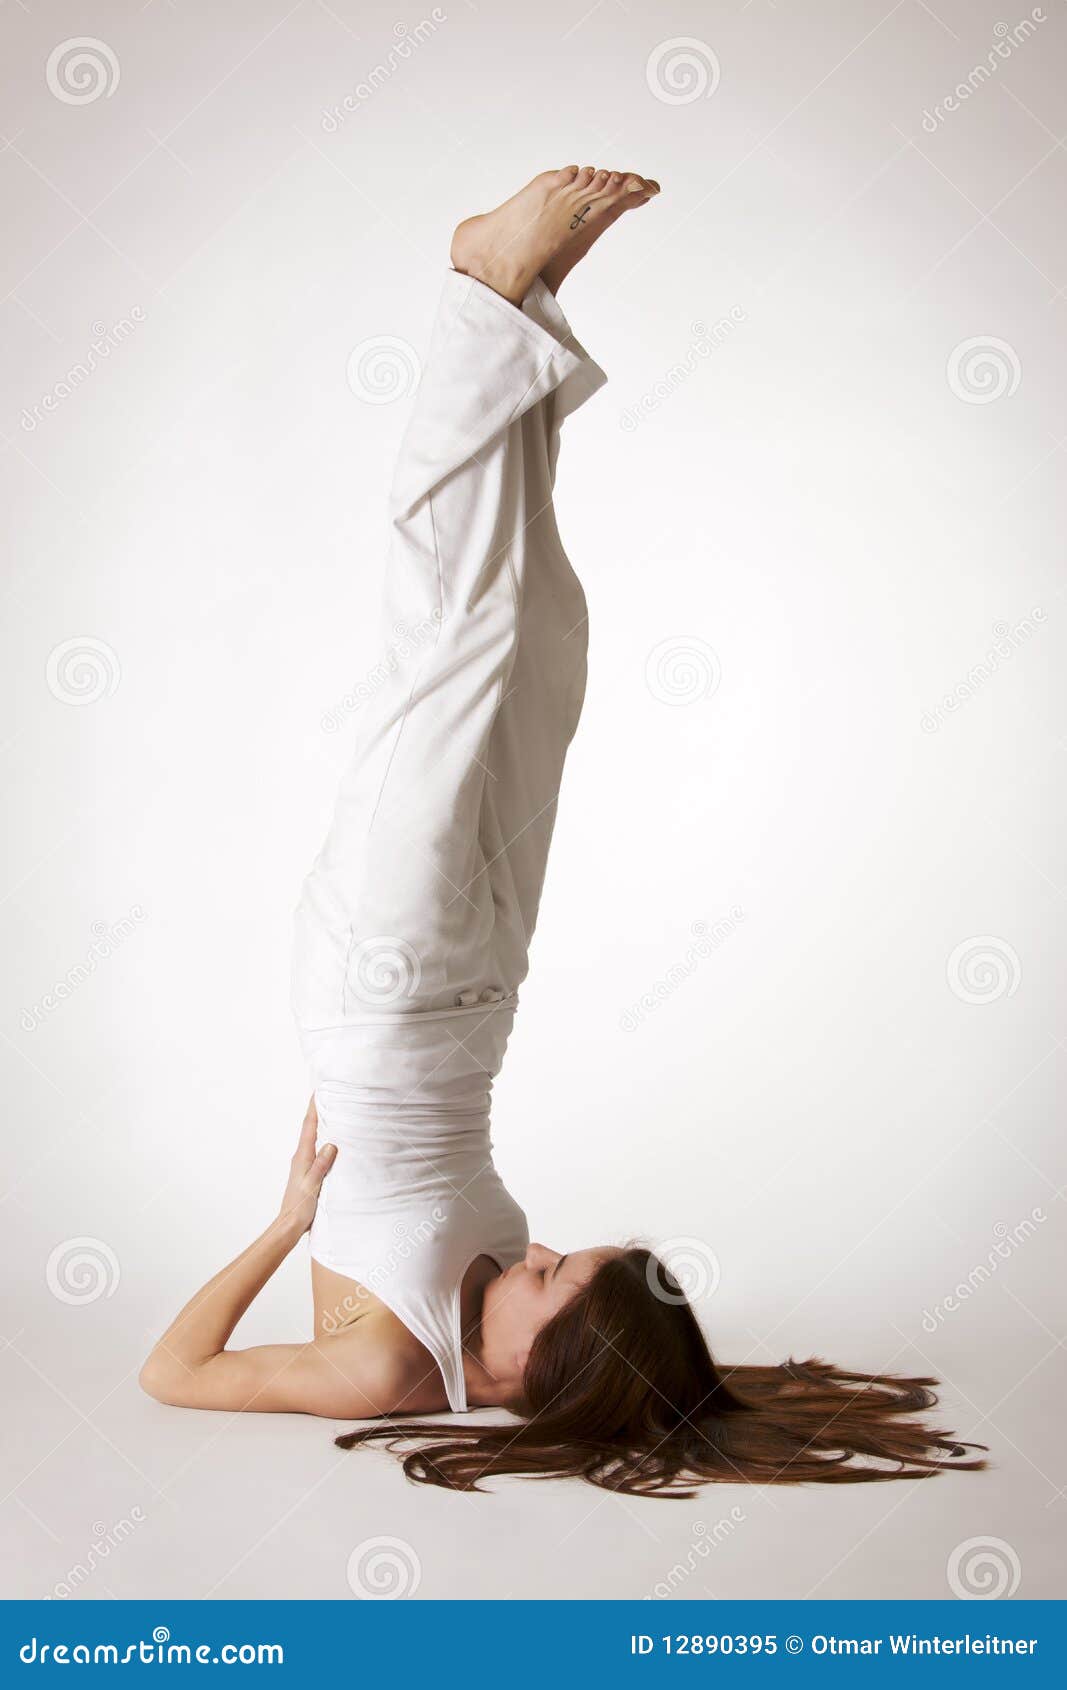 1,968 Yoga Shoulder Stand Pose Images, Stock Photos, 3D objects, & Vectors  | Shutterstock